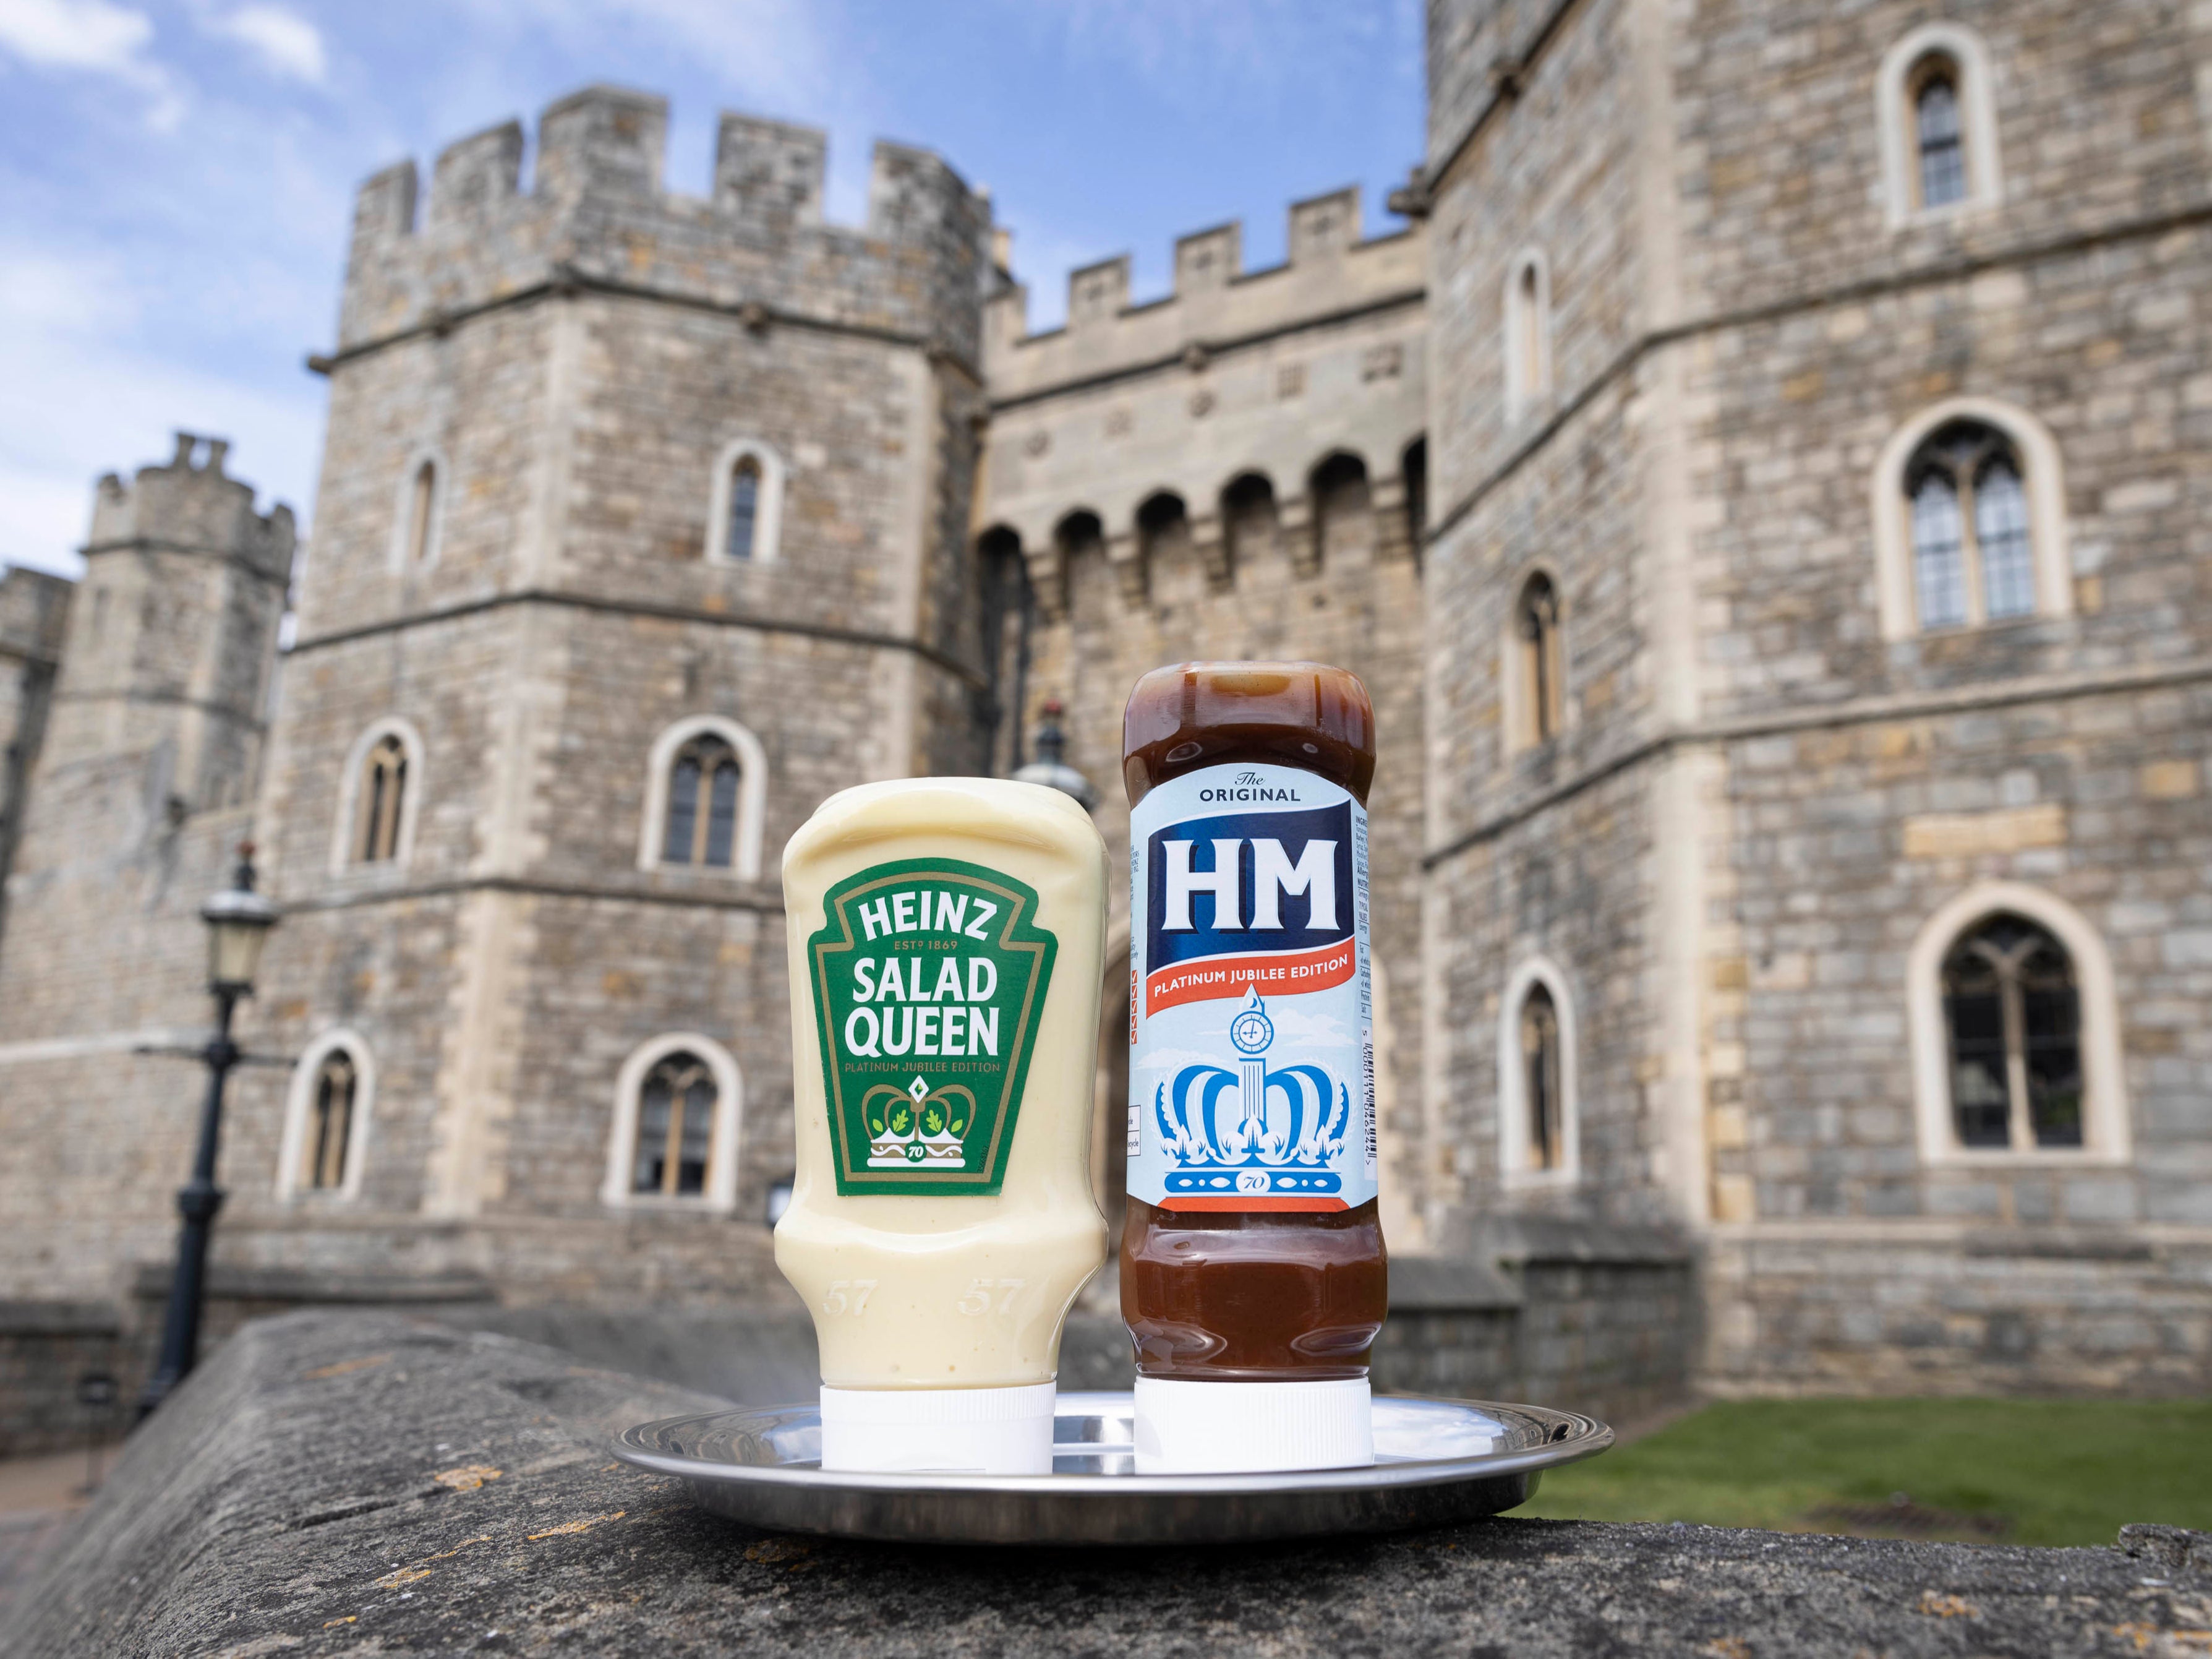 Celebratory, limited edition Jubilee bottles of Heinz Salad Cream and HP Sauce, which have been renamed 'Heinz Salad Queen' and 'HM Sauce', respectively, are unveiled at Windsor Castle